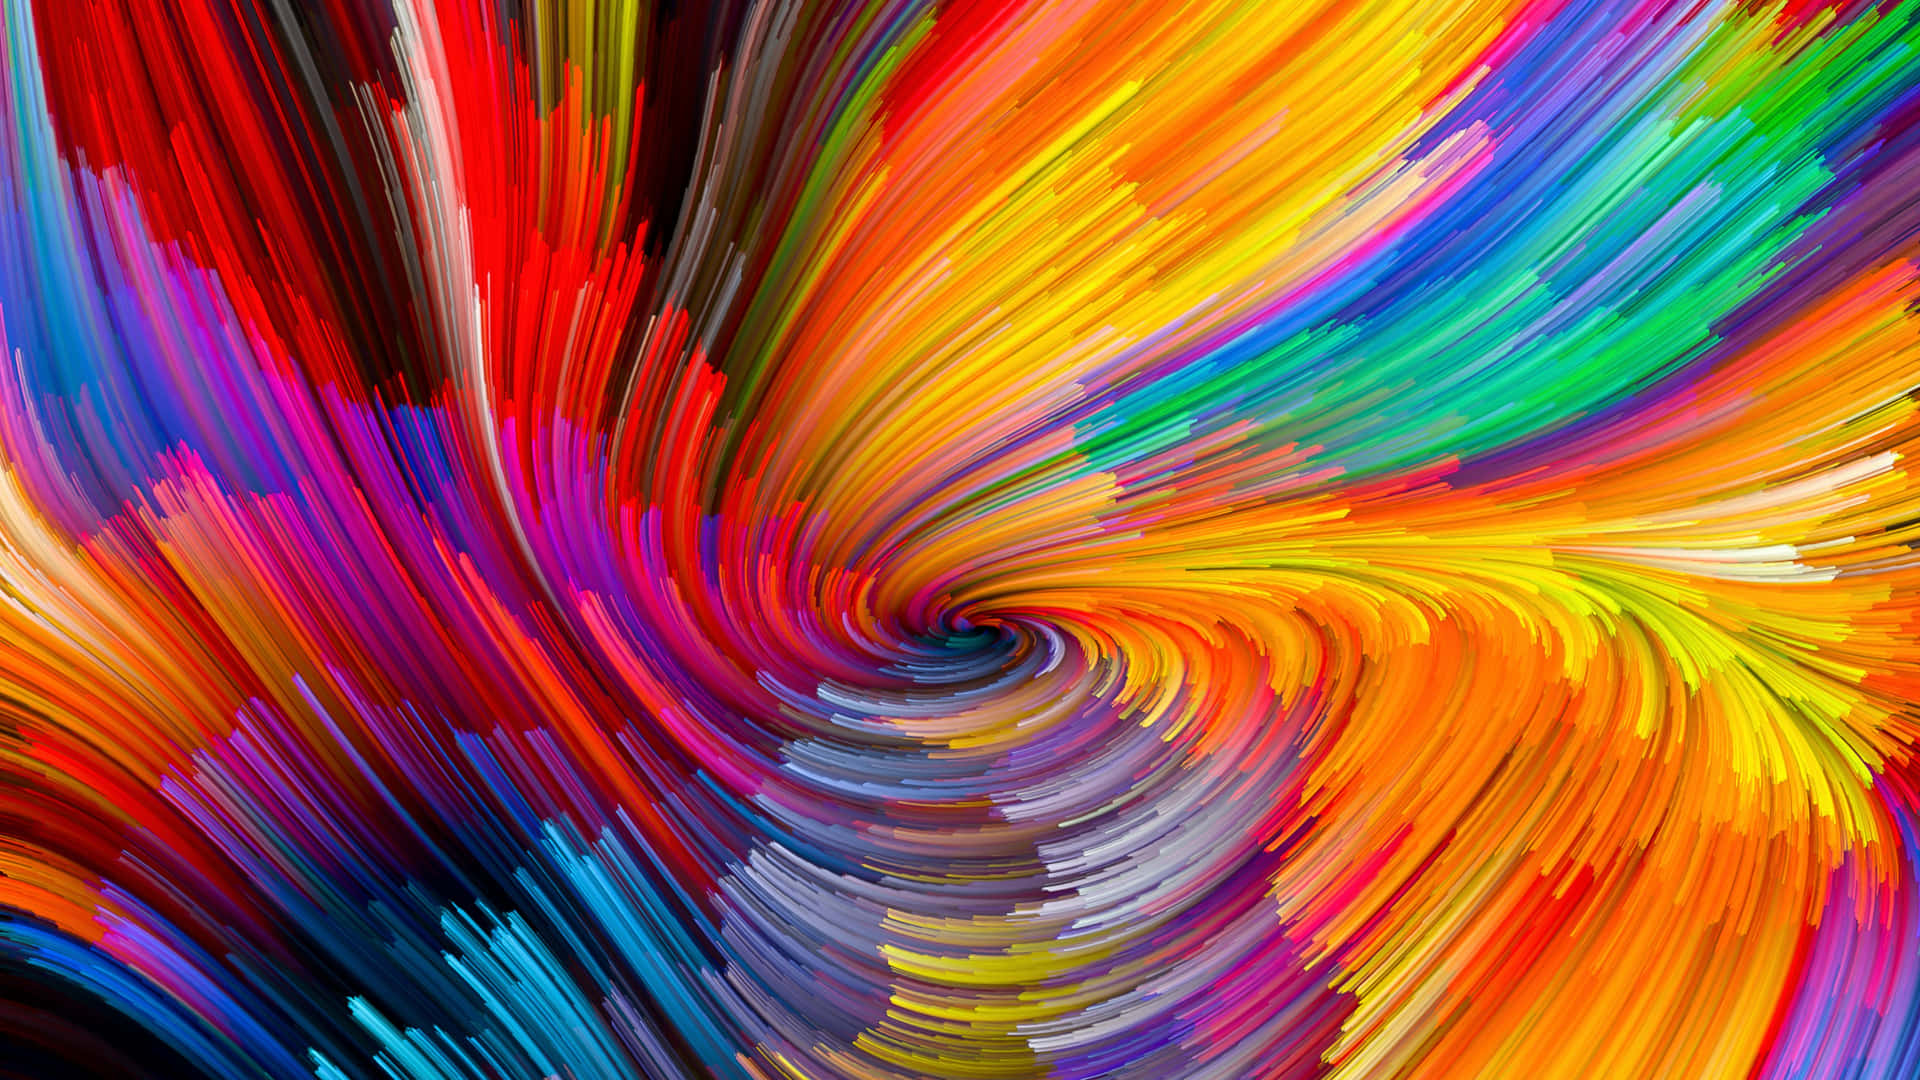 Colorful Swirl Abstract Art Wallpaper